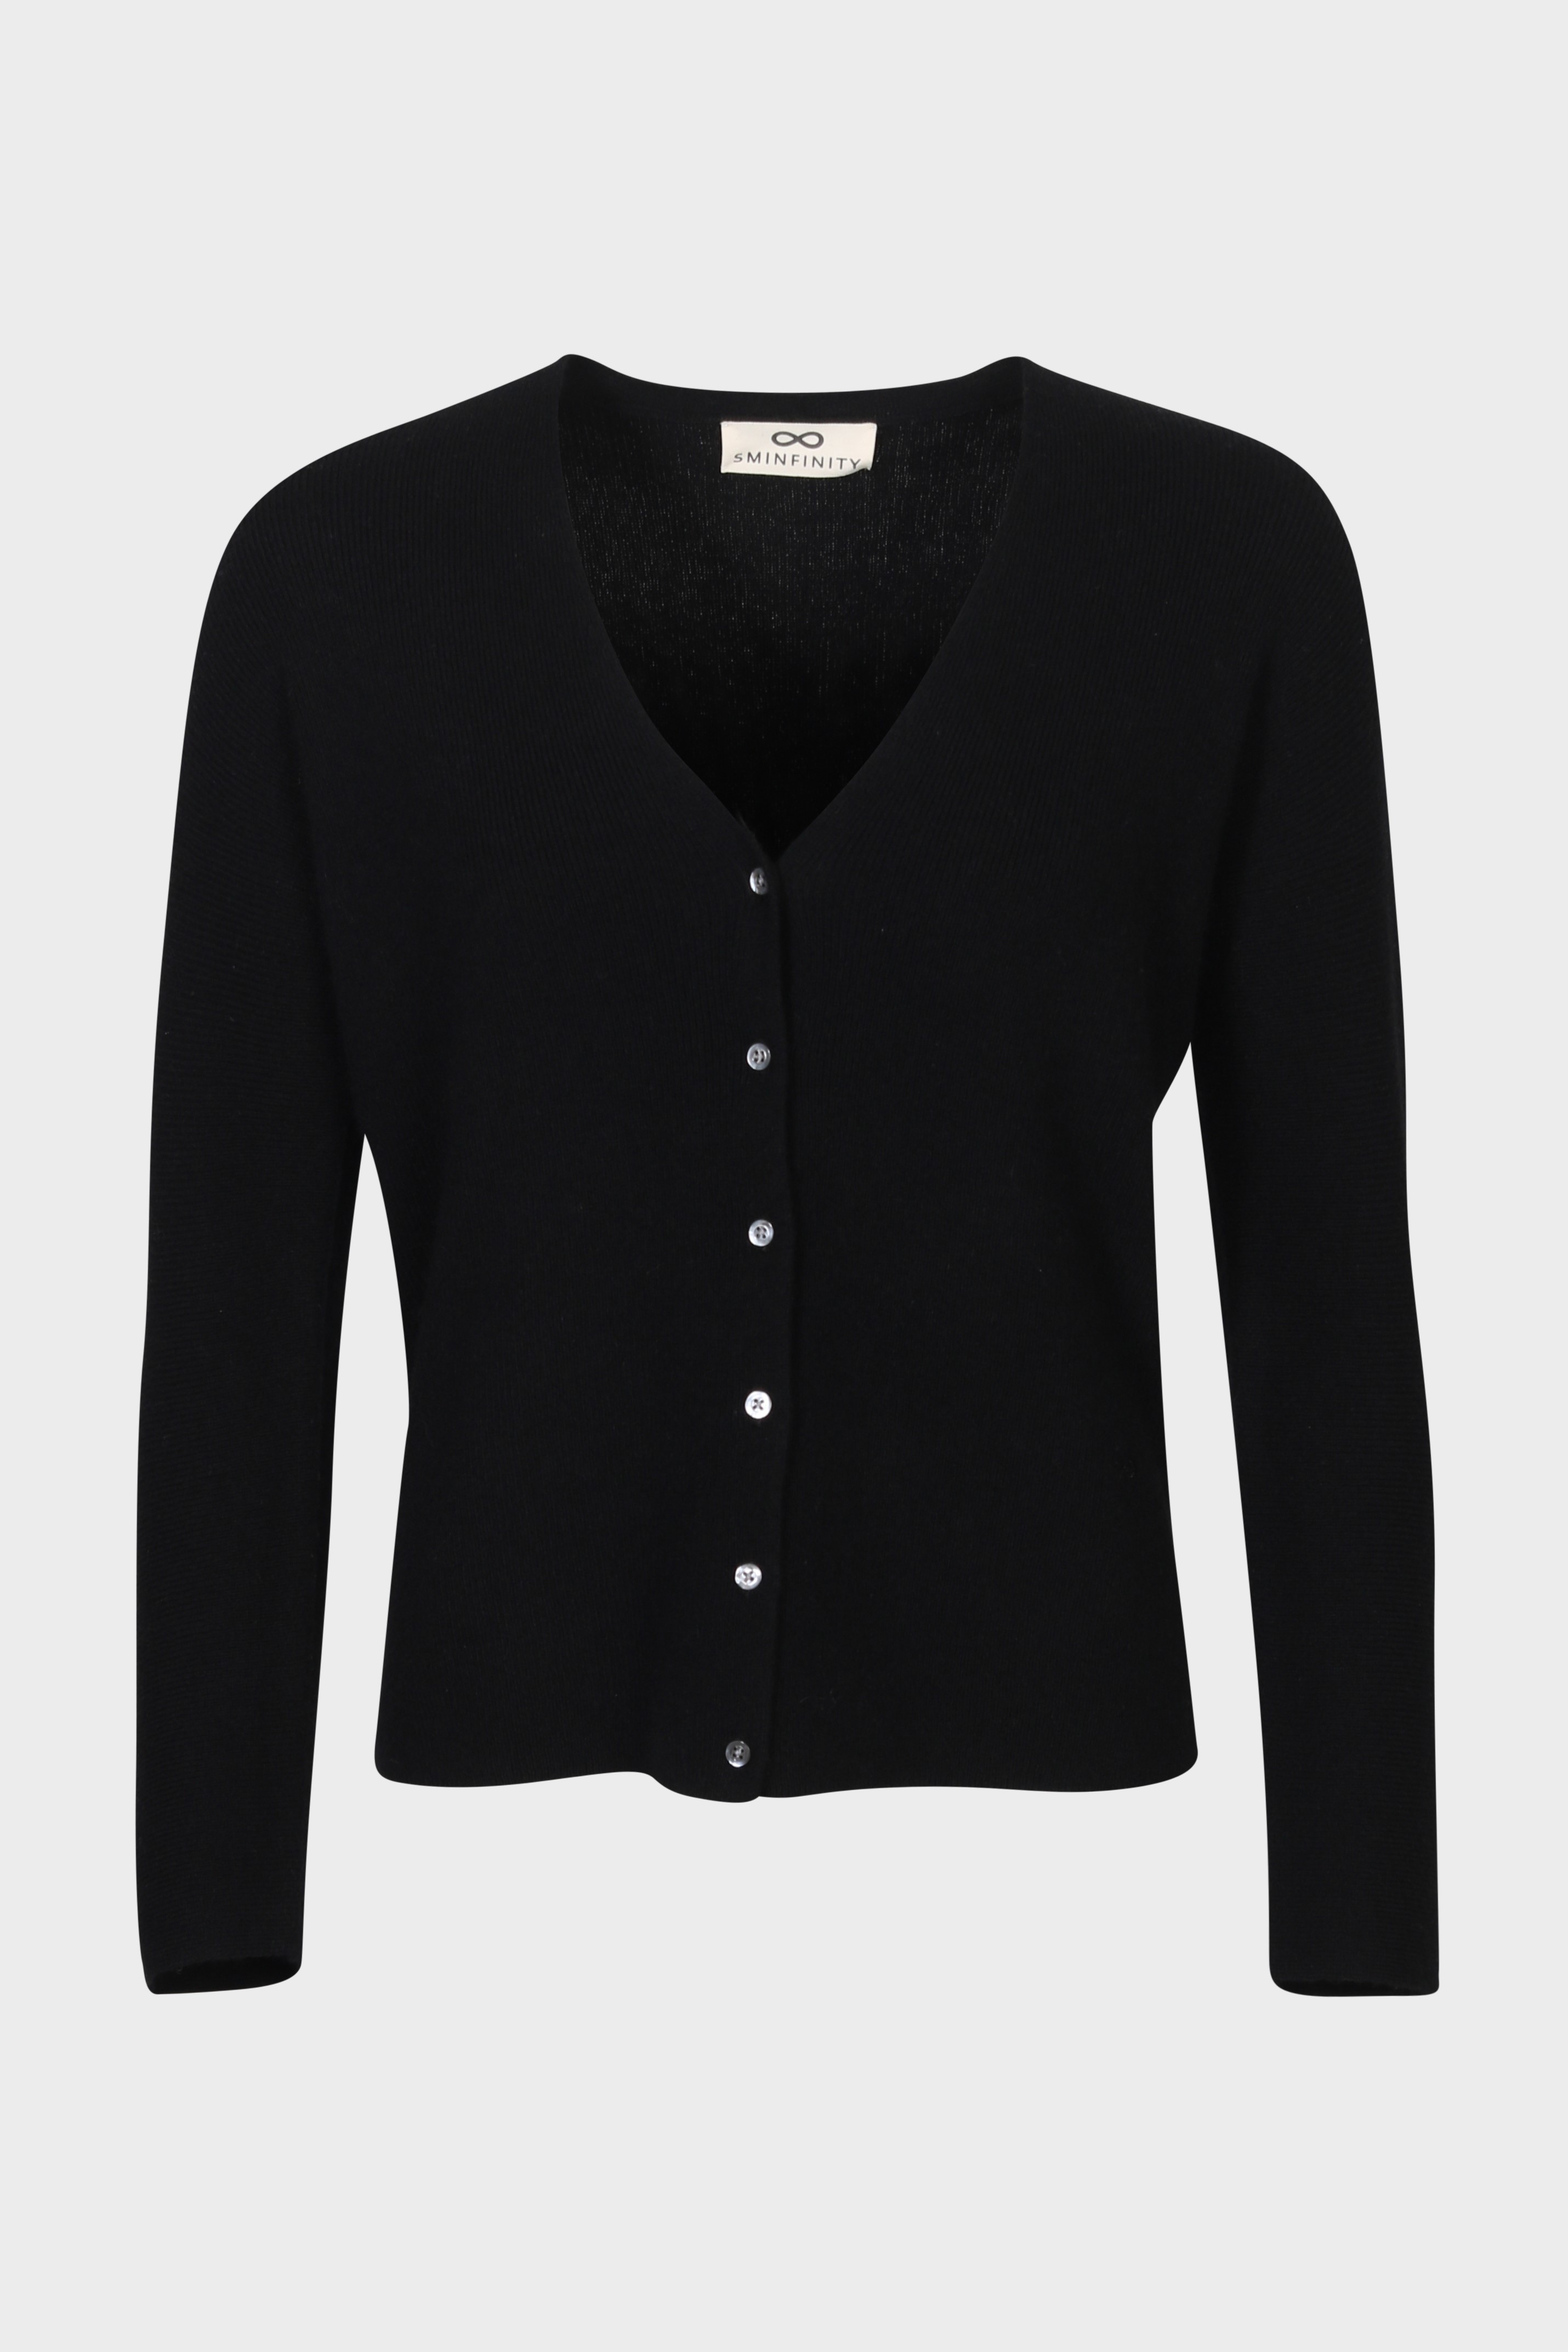 SMINFINITY Chilly Fitted Knit Cardigan in Black